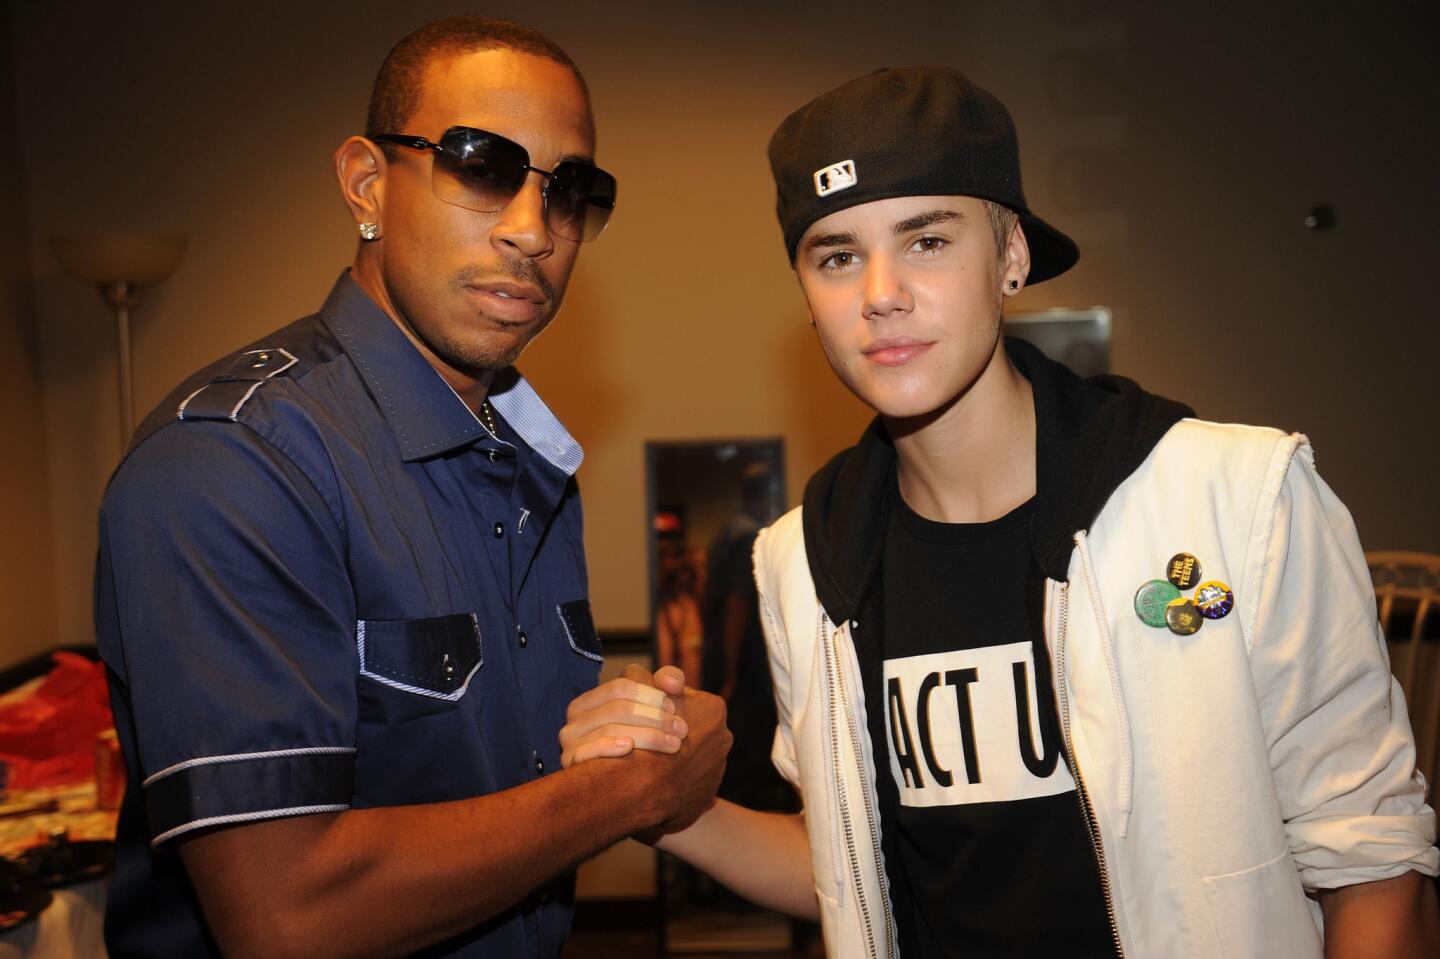 Ludacris and Justin Bieber: "Baby"